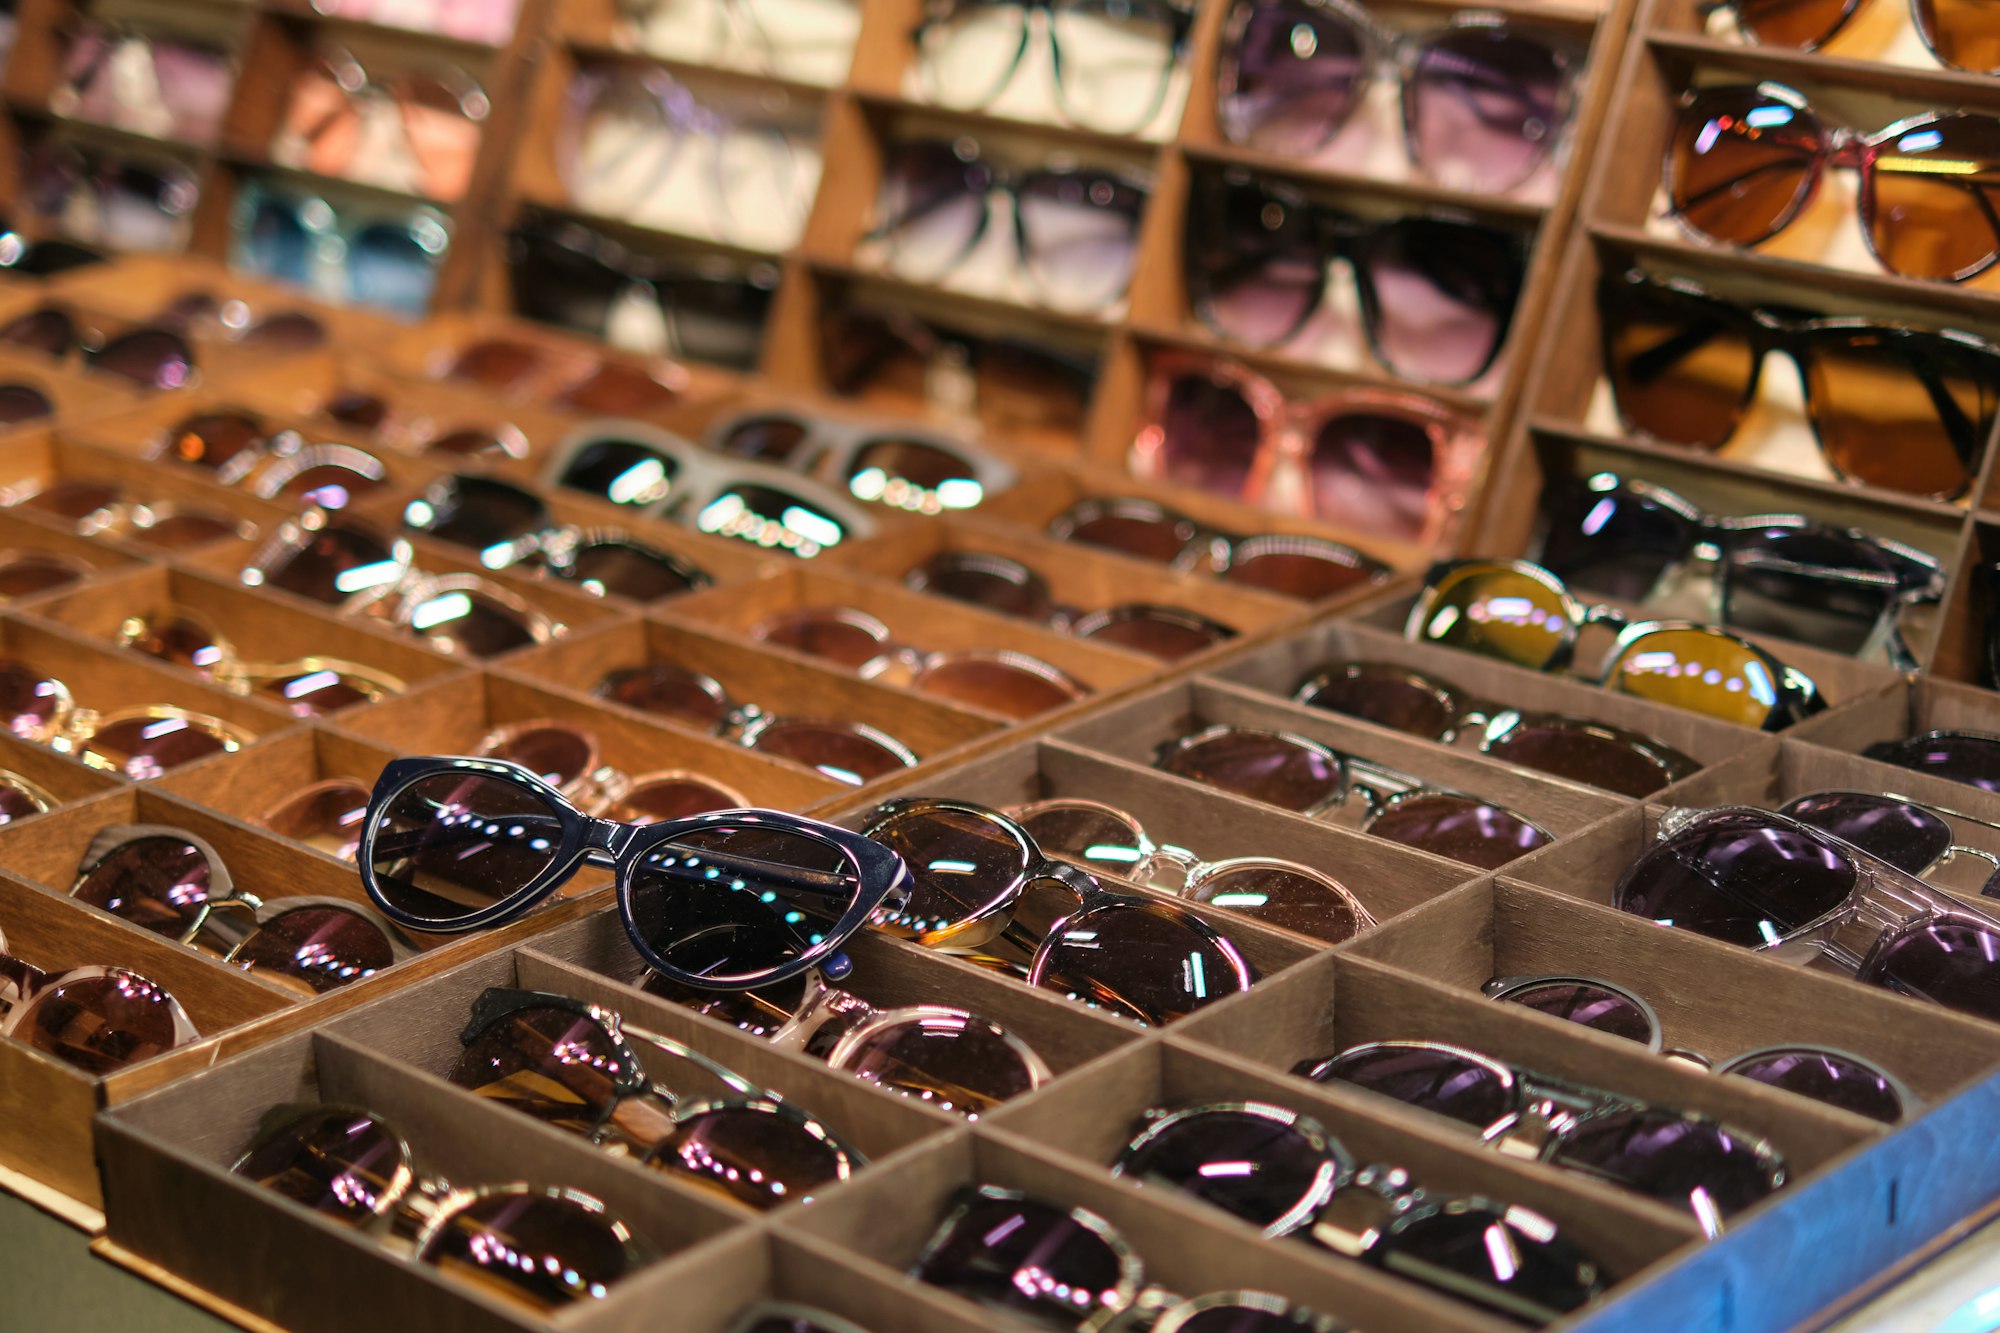 market stall filled with a diverse selection of sunglasses, showcasing affordable eyewear options